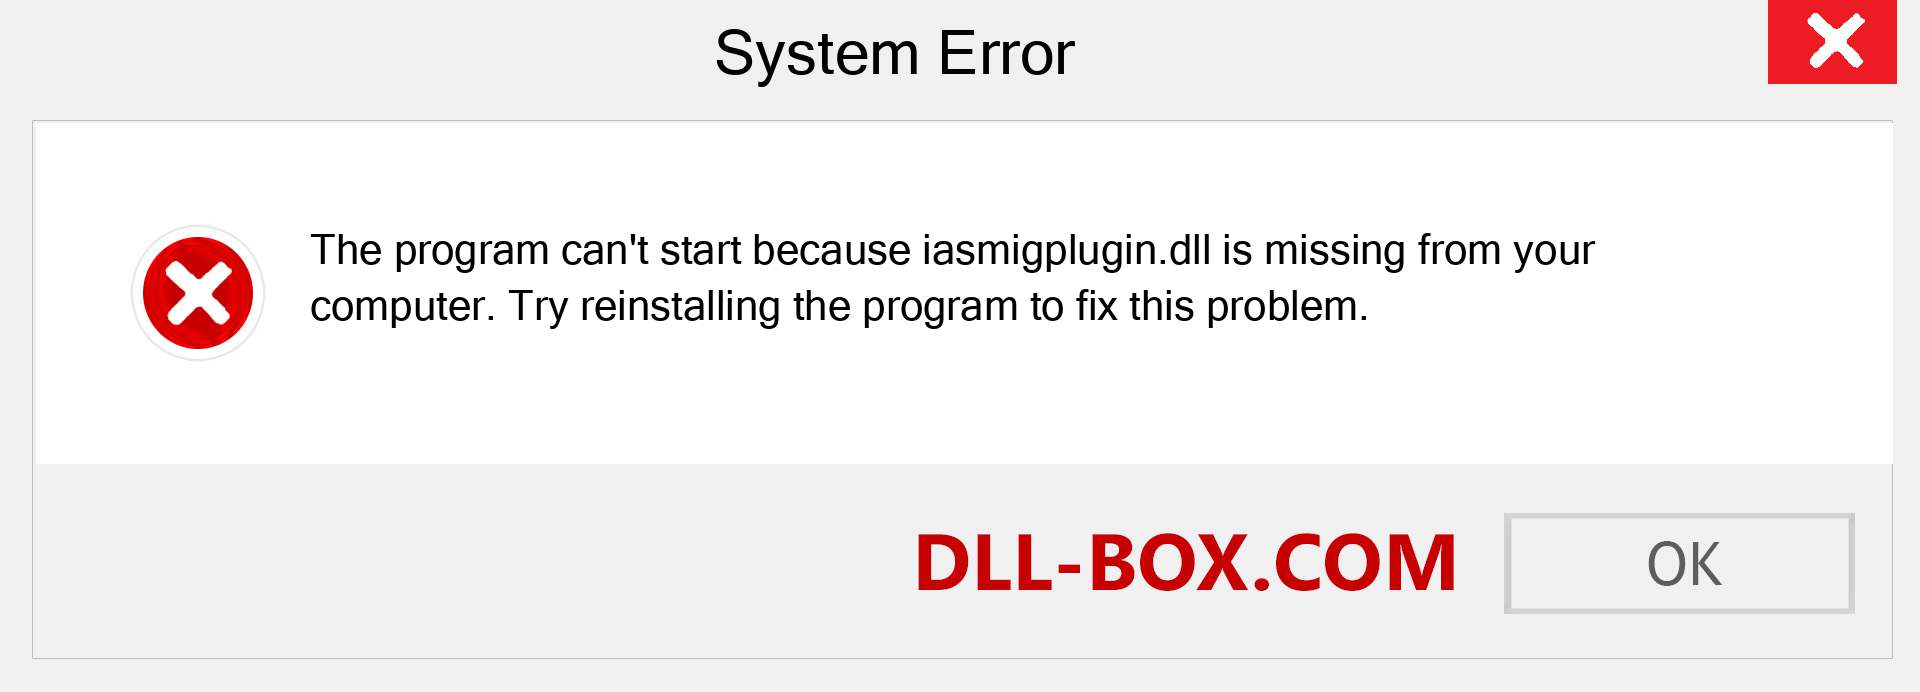  iasmigplugin.dll file is missing?. Download for Windows 7, 8, 10 - Fix  iasmigplugin dll Missing Error on Windows, photos, images